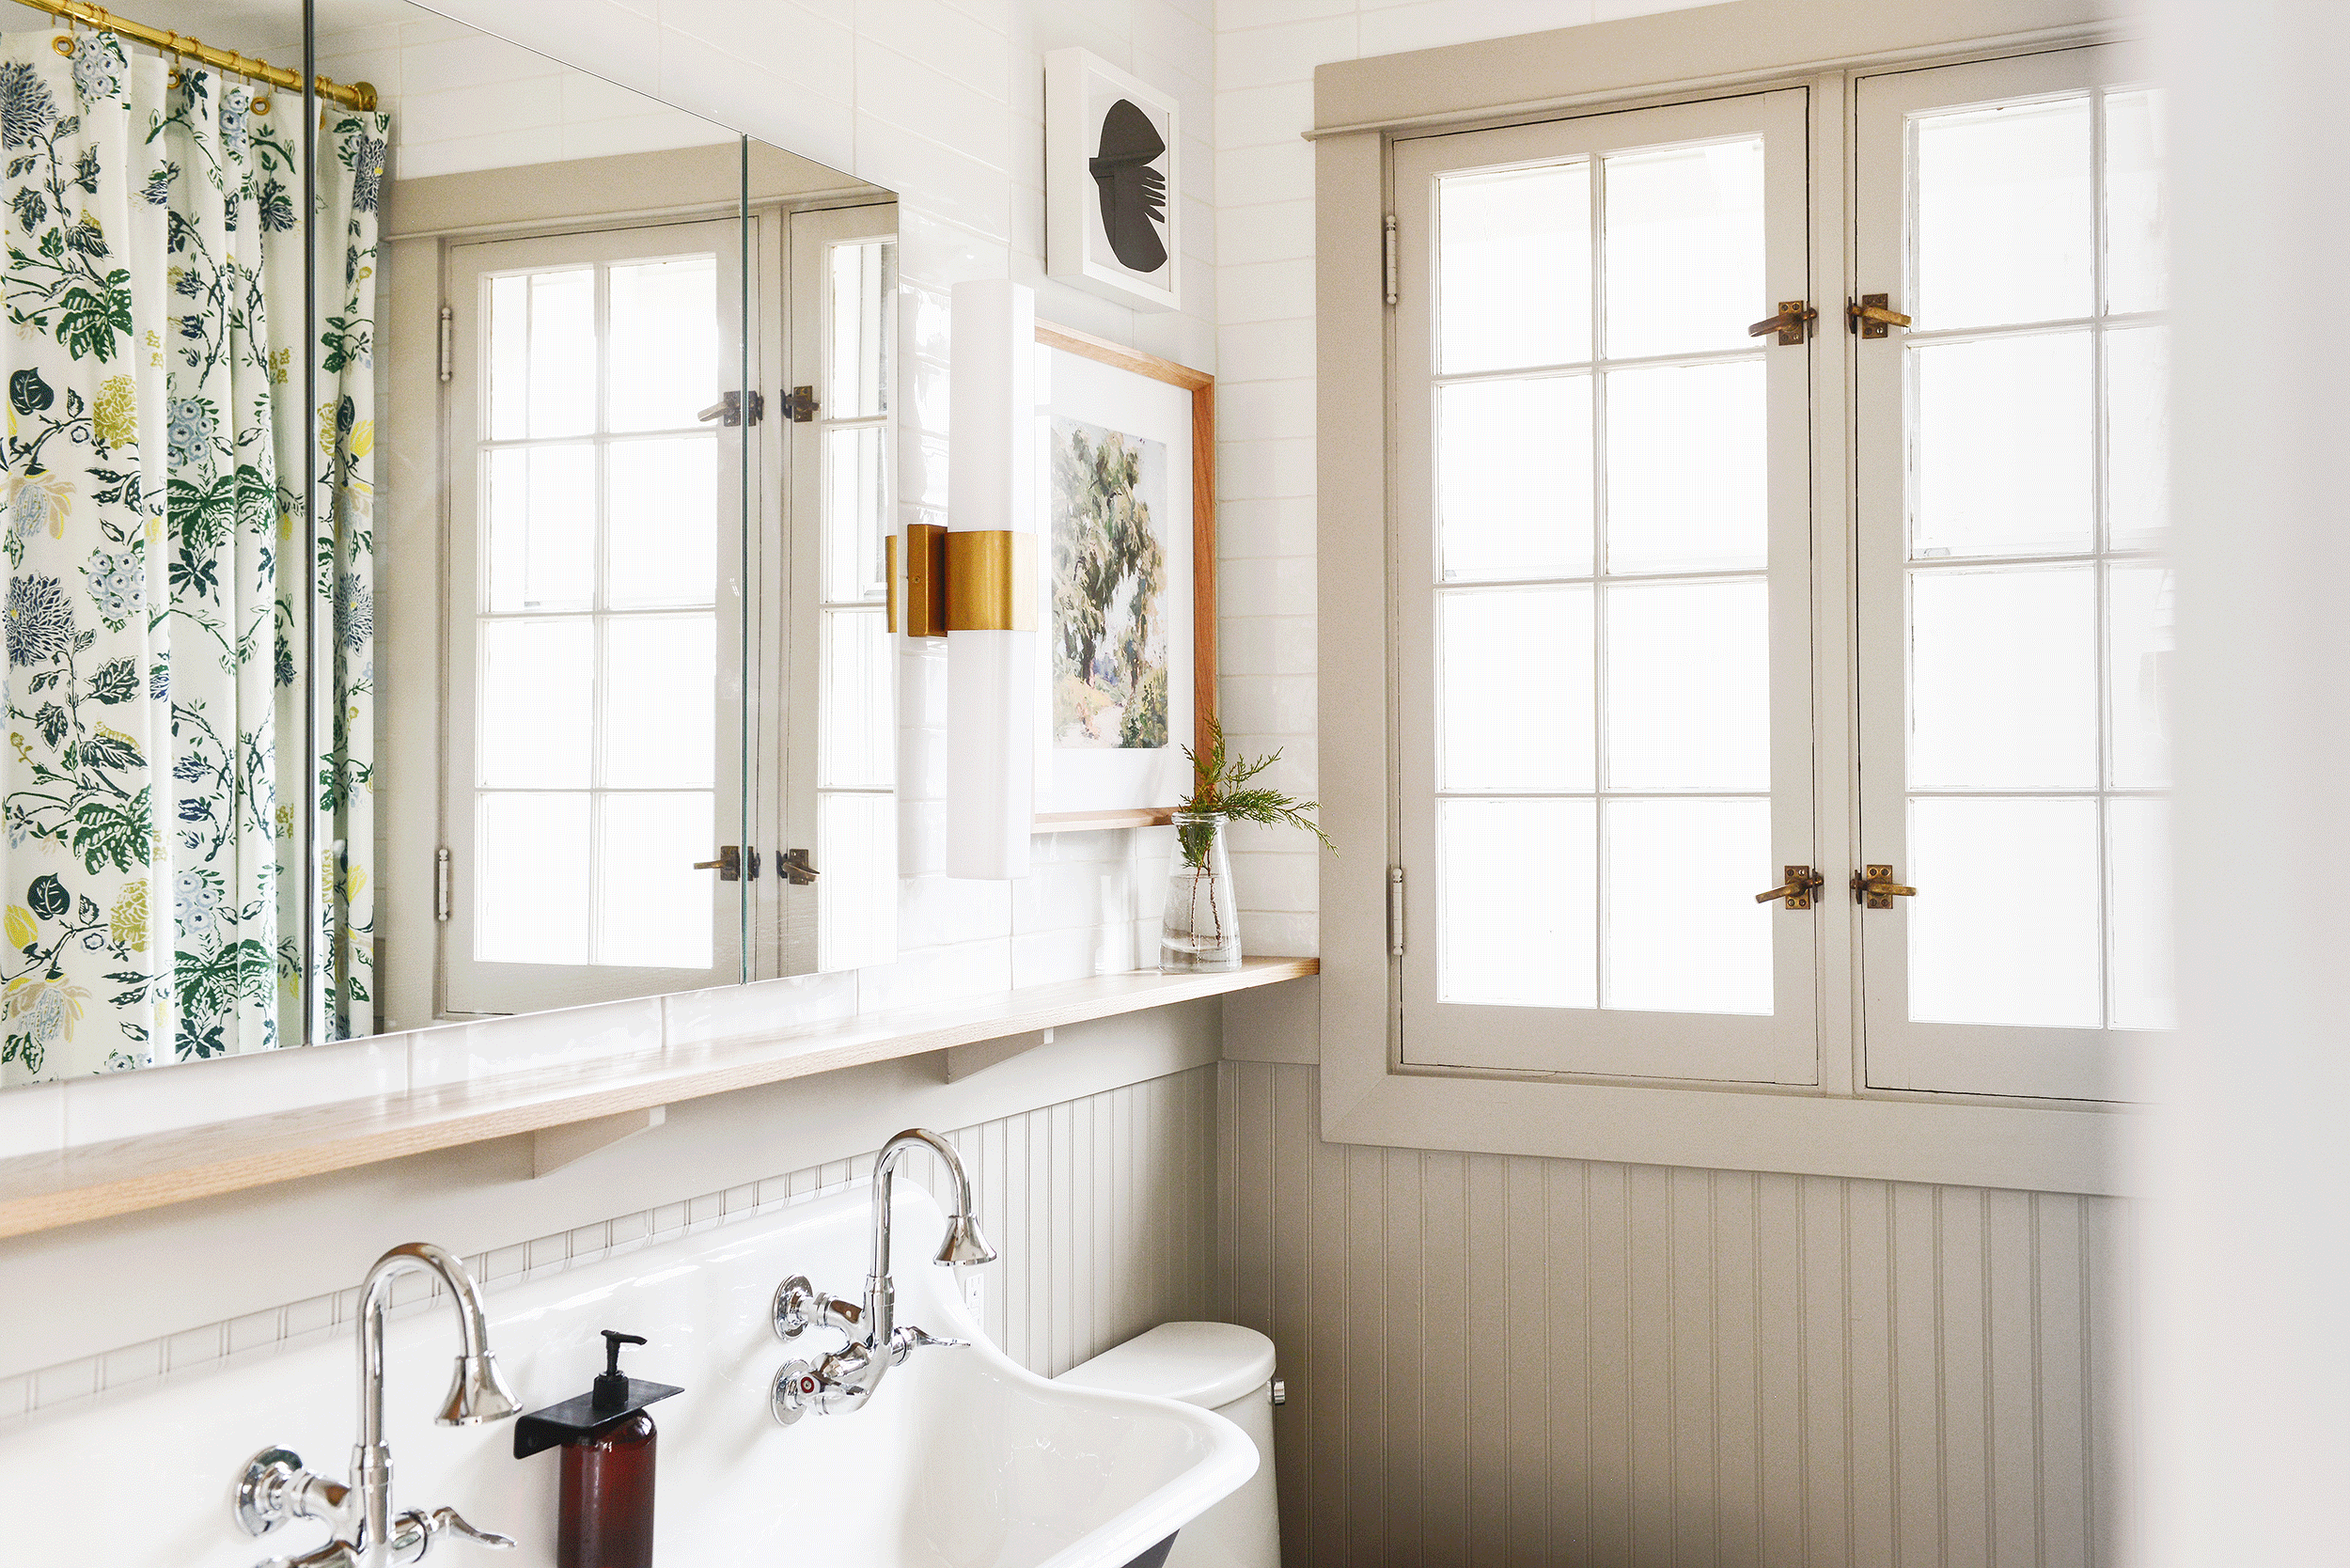 A GIF shows large mirrored medicine cabinet doors opening and closing in a green and tan bathroom // via Yellow Brick Home